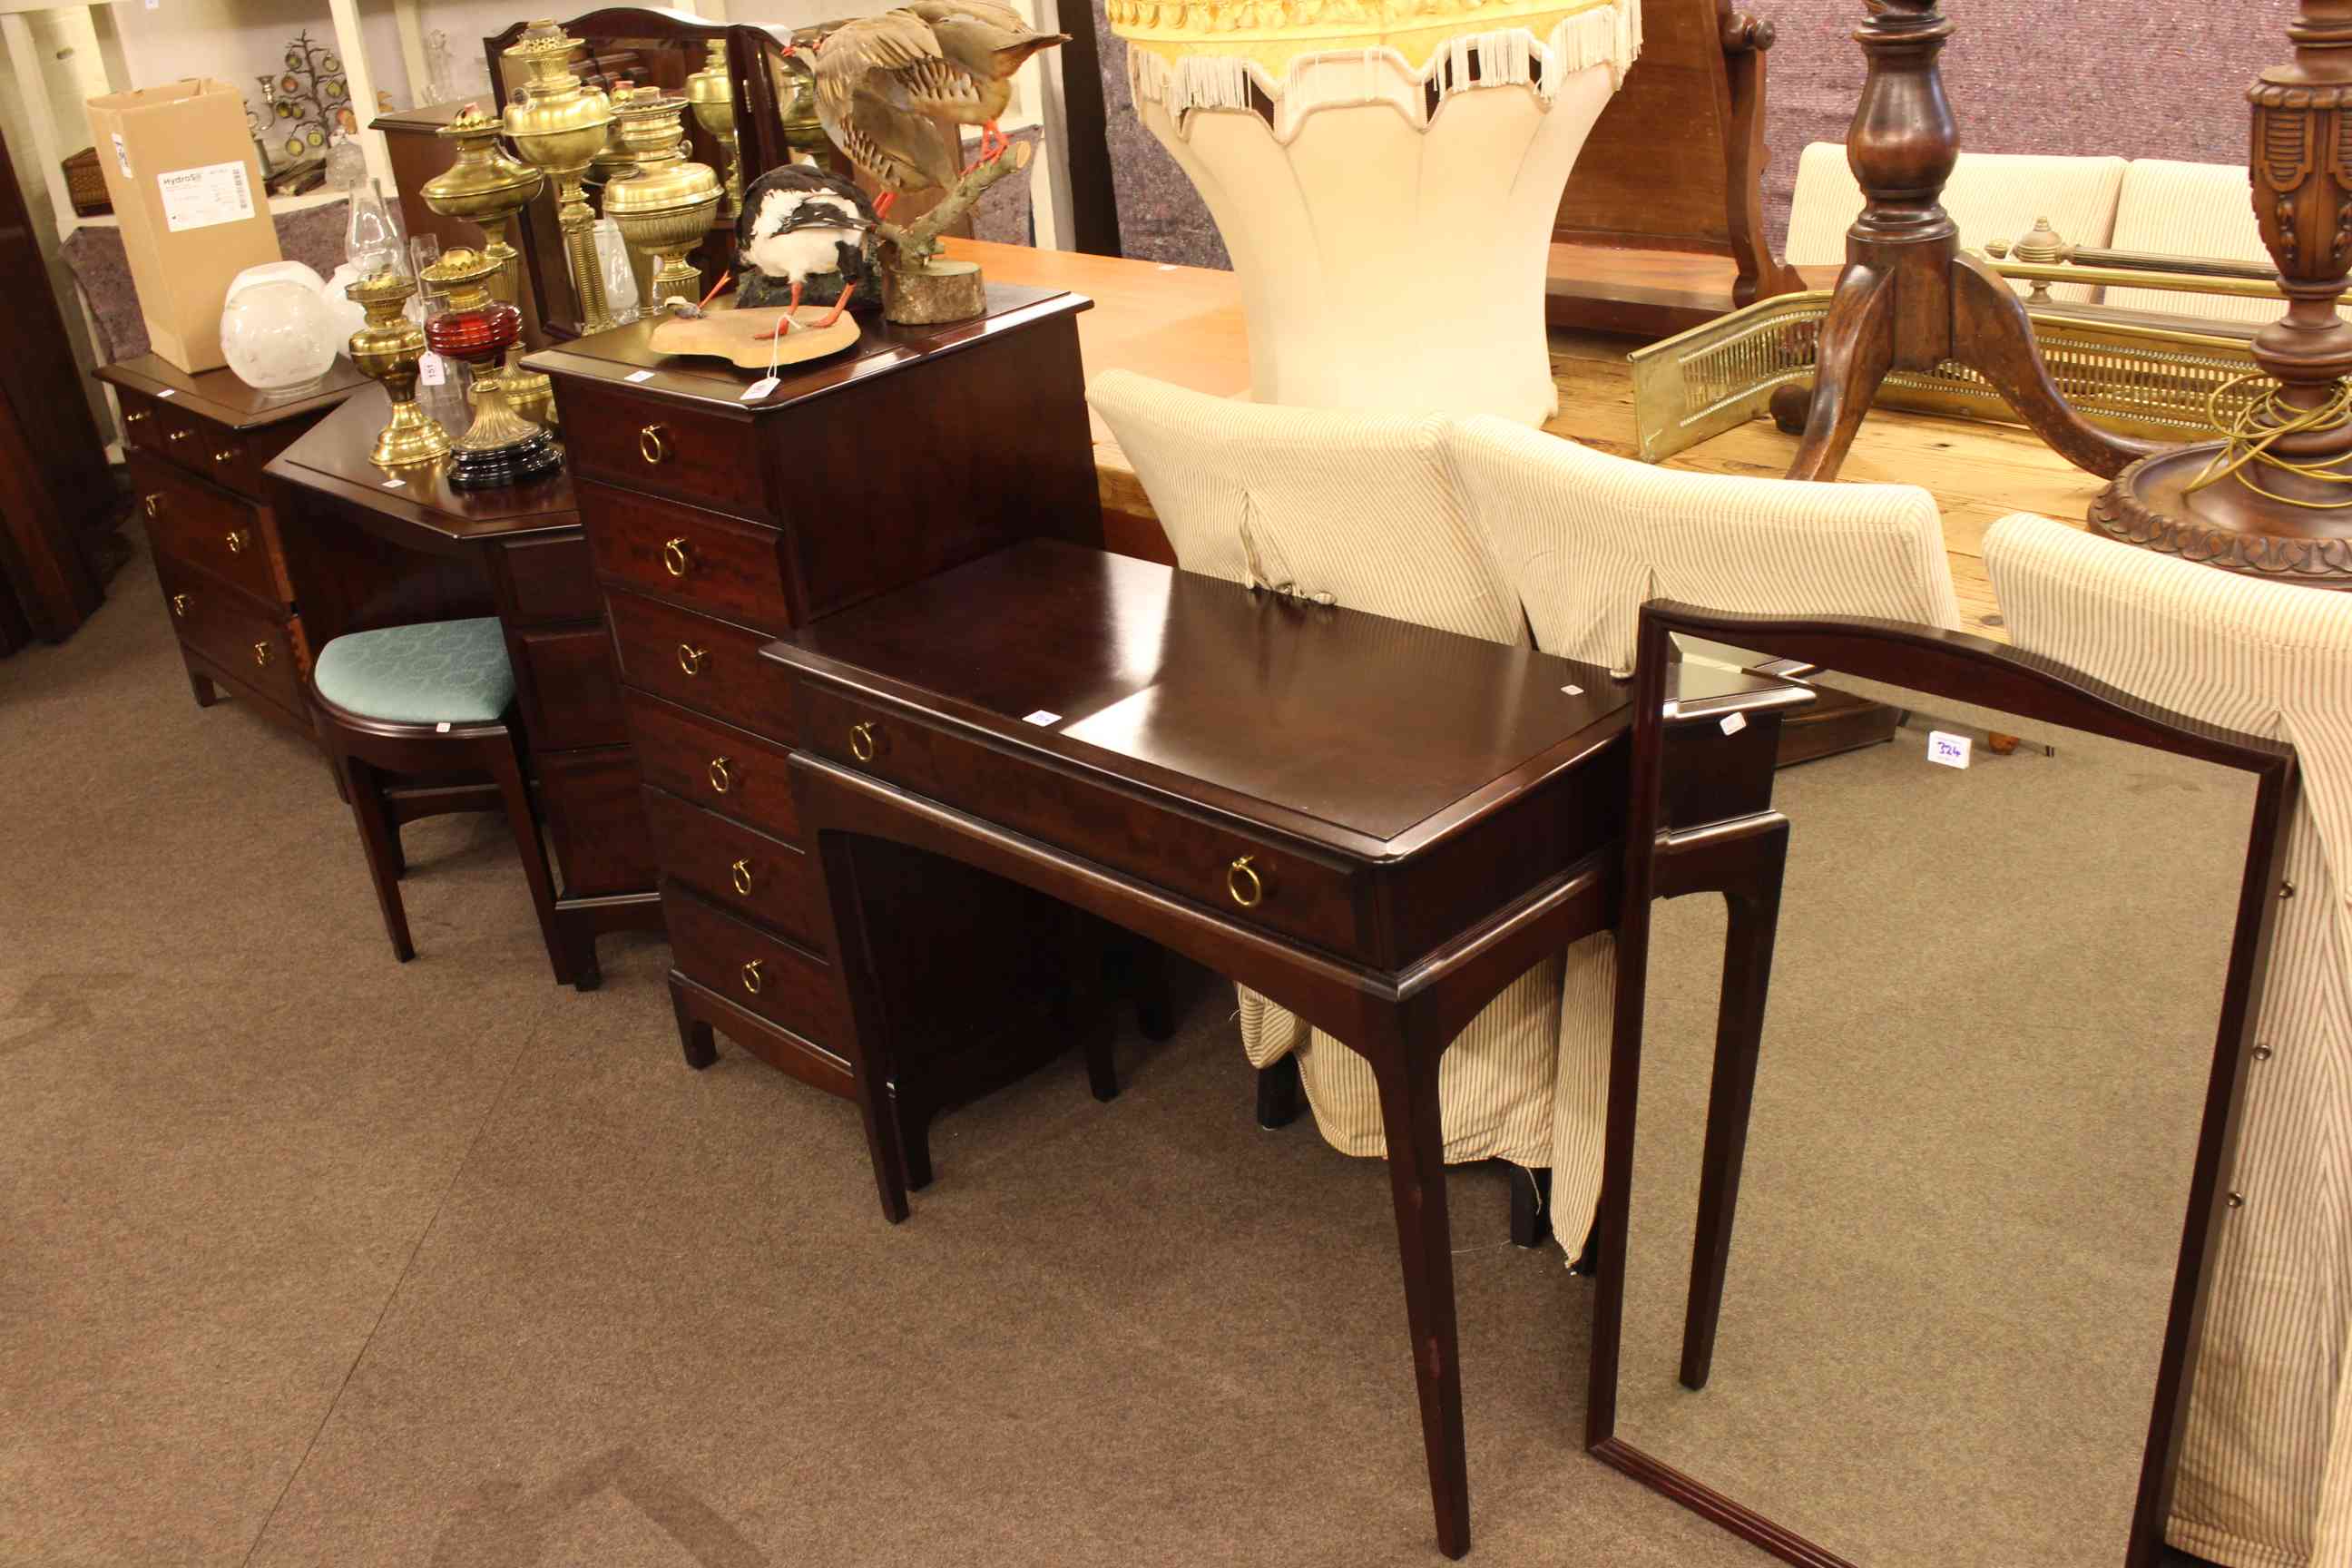 Collection of Stag Minstrel furniture to include corner dressing table and stool, five drawer chest, - Image 2 of 2